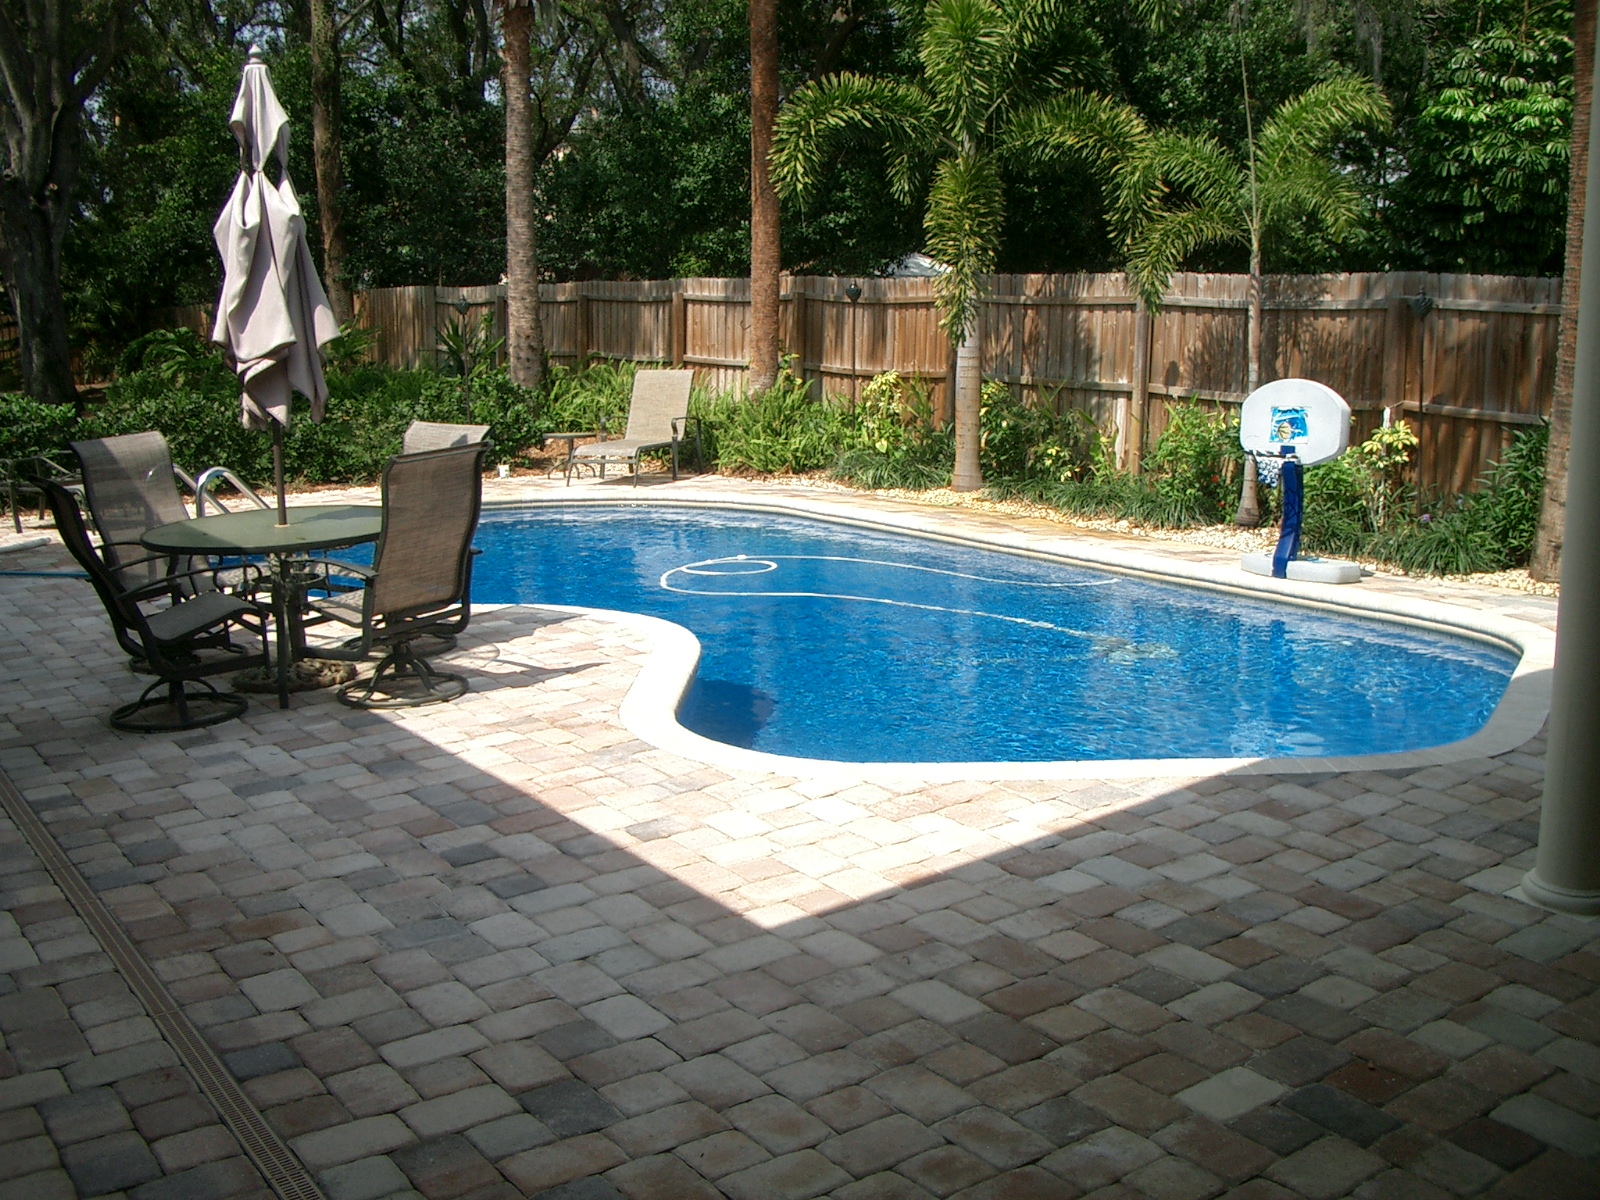 backyard with pool landscaping ideas photo - 1